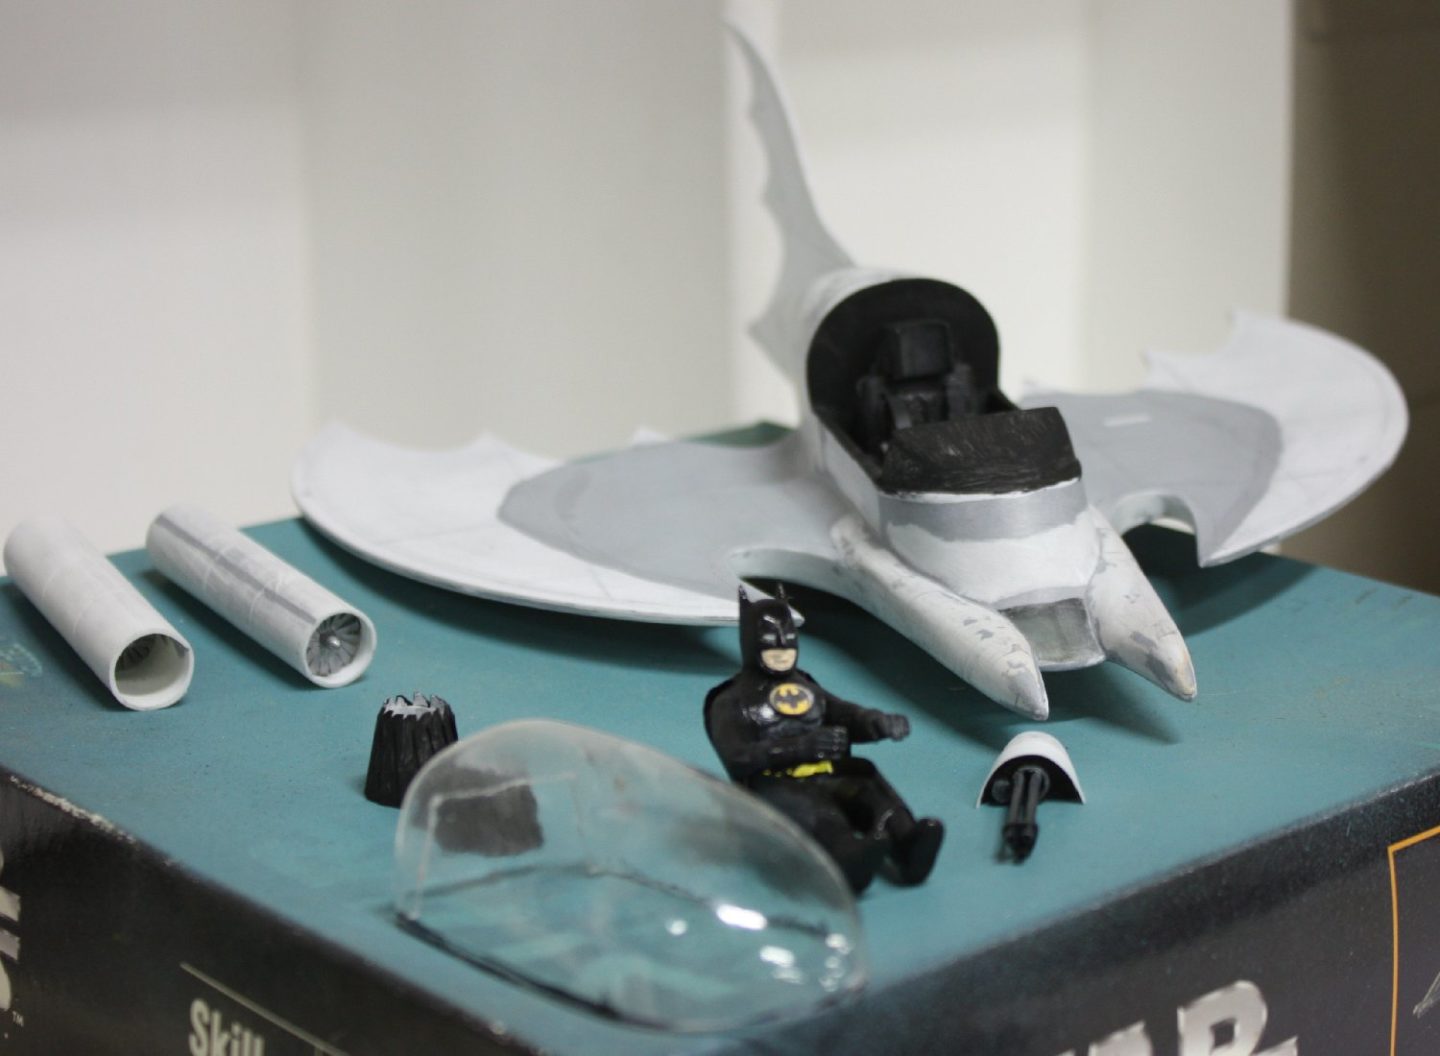 Rich's Batwing "ate" the UFO (note the gray plastic areas from the Testor's kit)